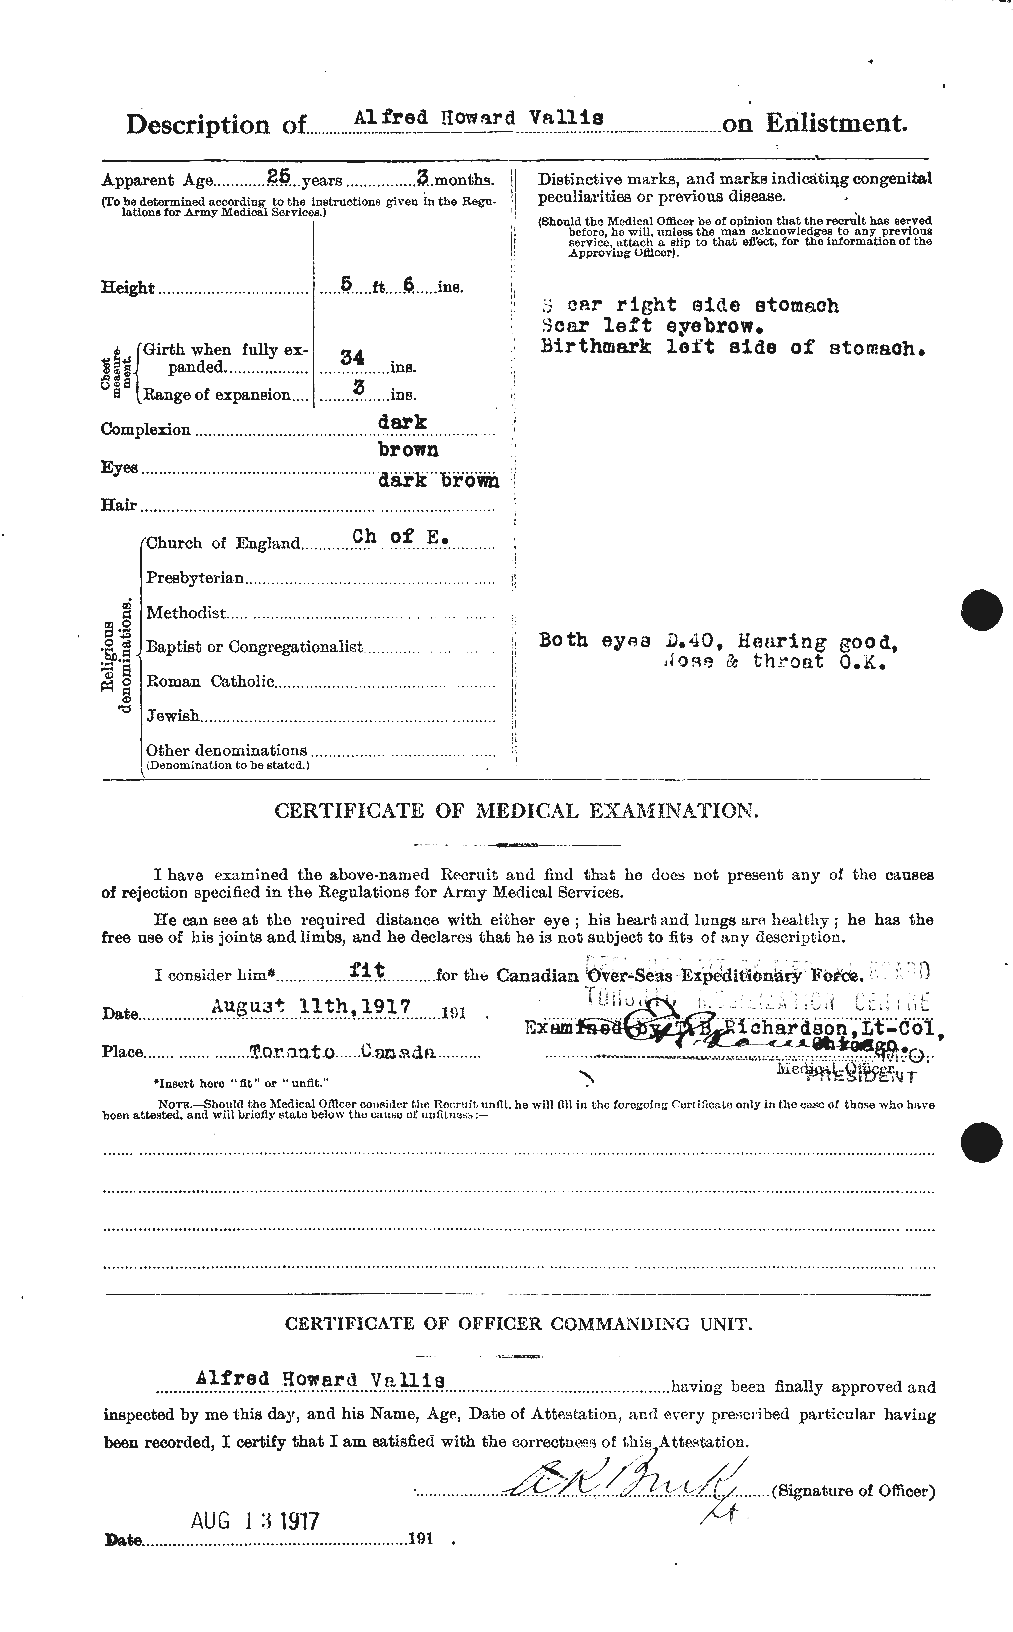 Personnel Records of the First World War - CEF 646509b